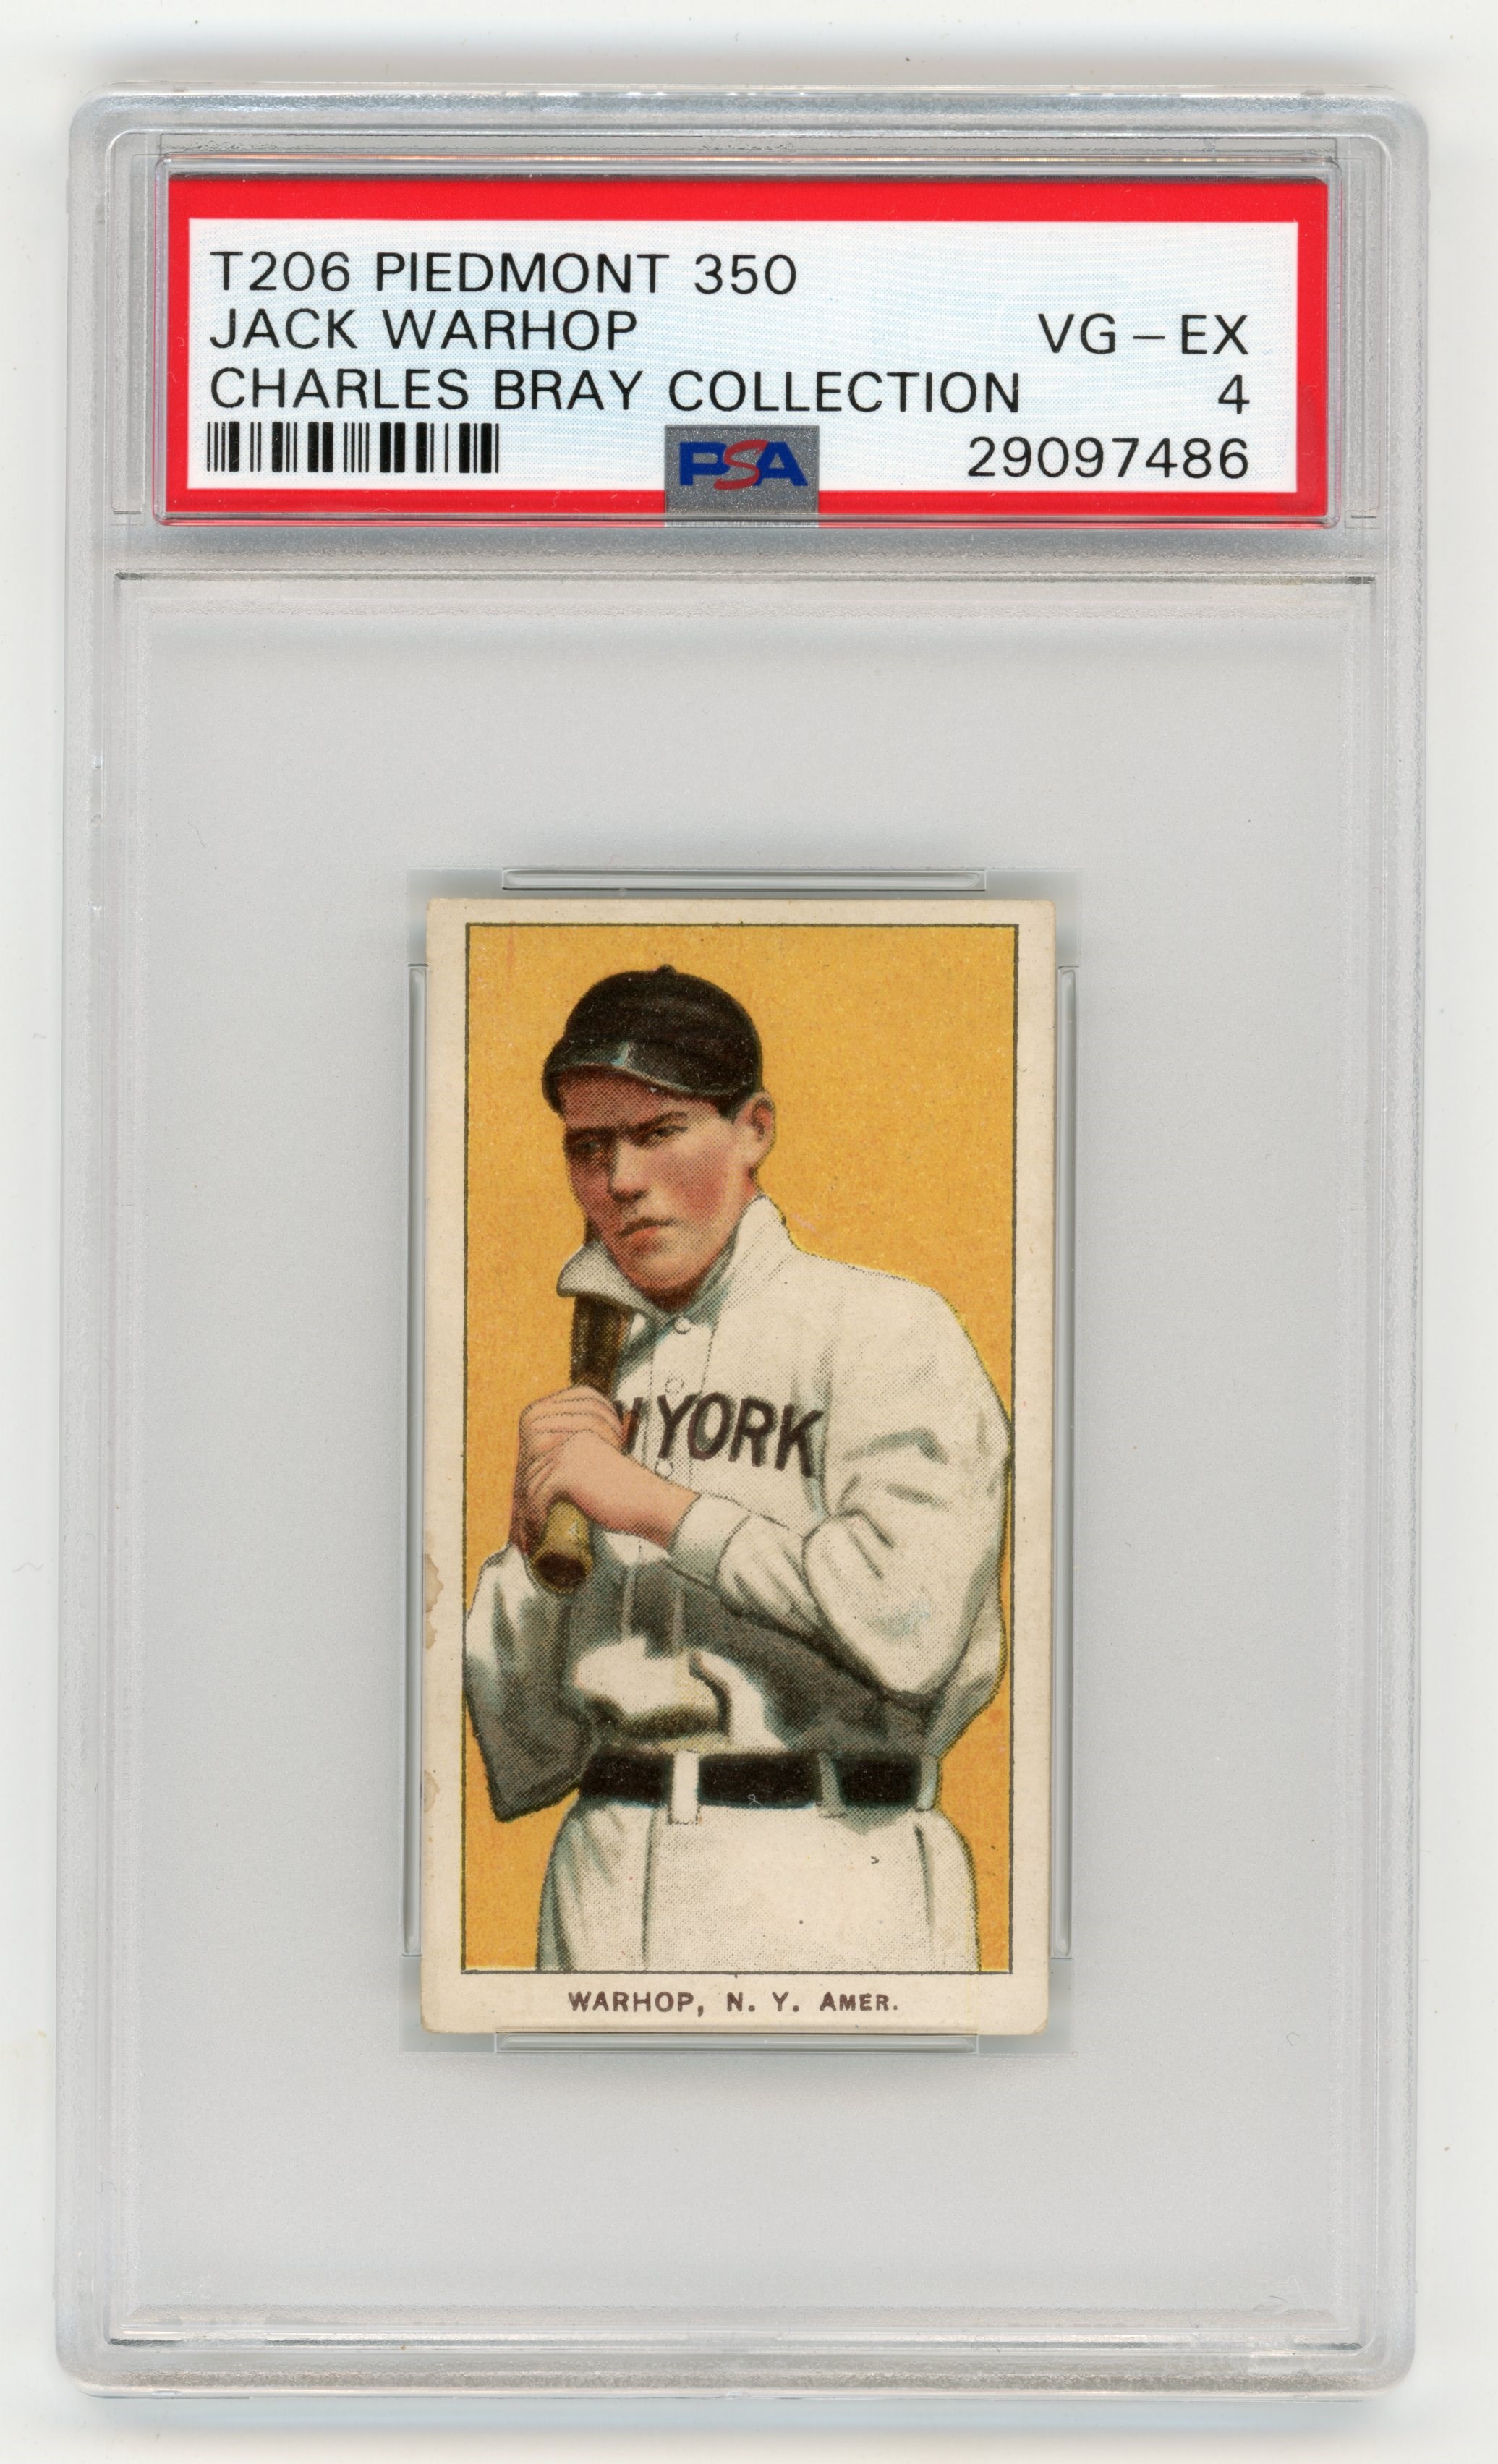 Baseball and Trading Cards - T206 Piedmont 350 Jack Warhop PSA VG-EX 4 From the Charles Bray Collection.